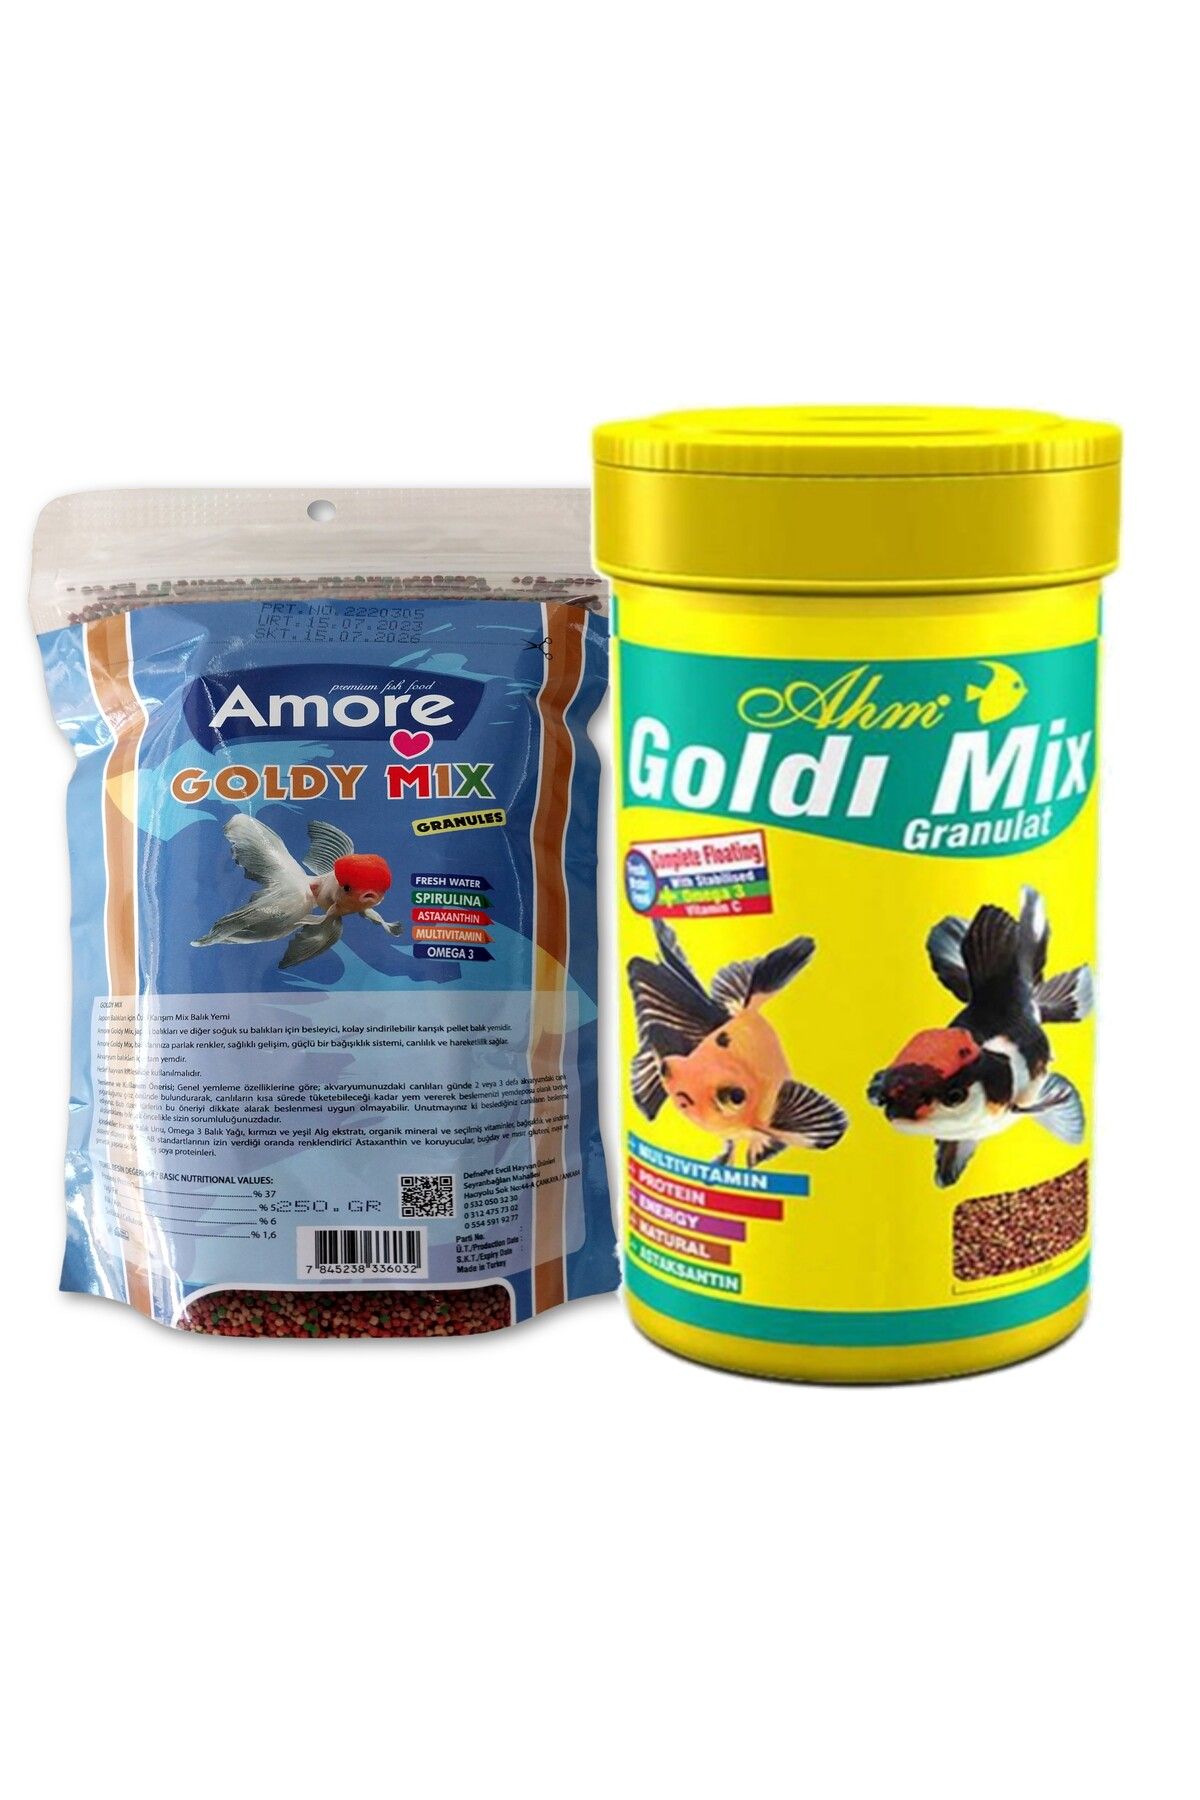 Amore Goldy Mix %37 Protein 250 Gr Easy-fill-pack Ve 1000 Ml Box Ahm Gold Mix Japon Balik Yemi